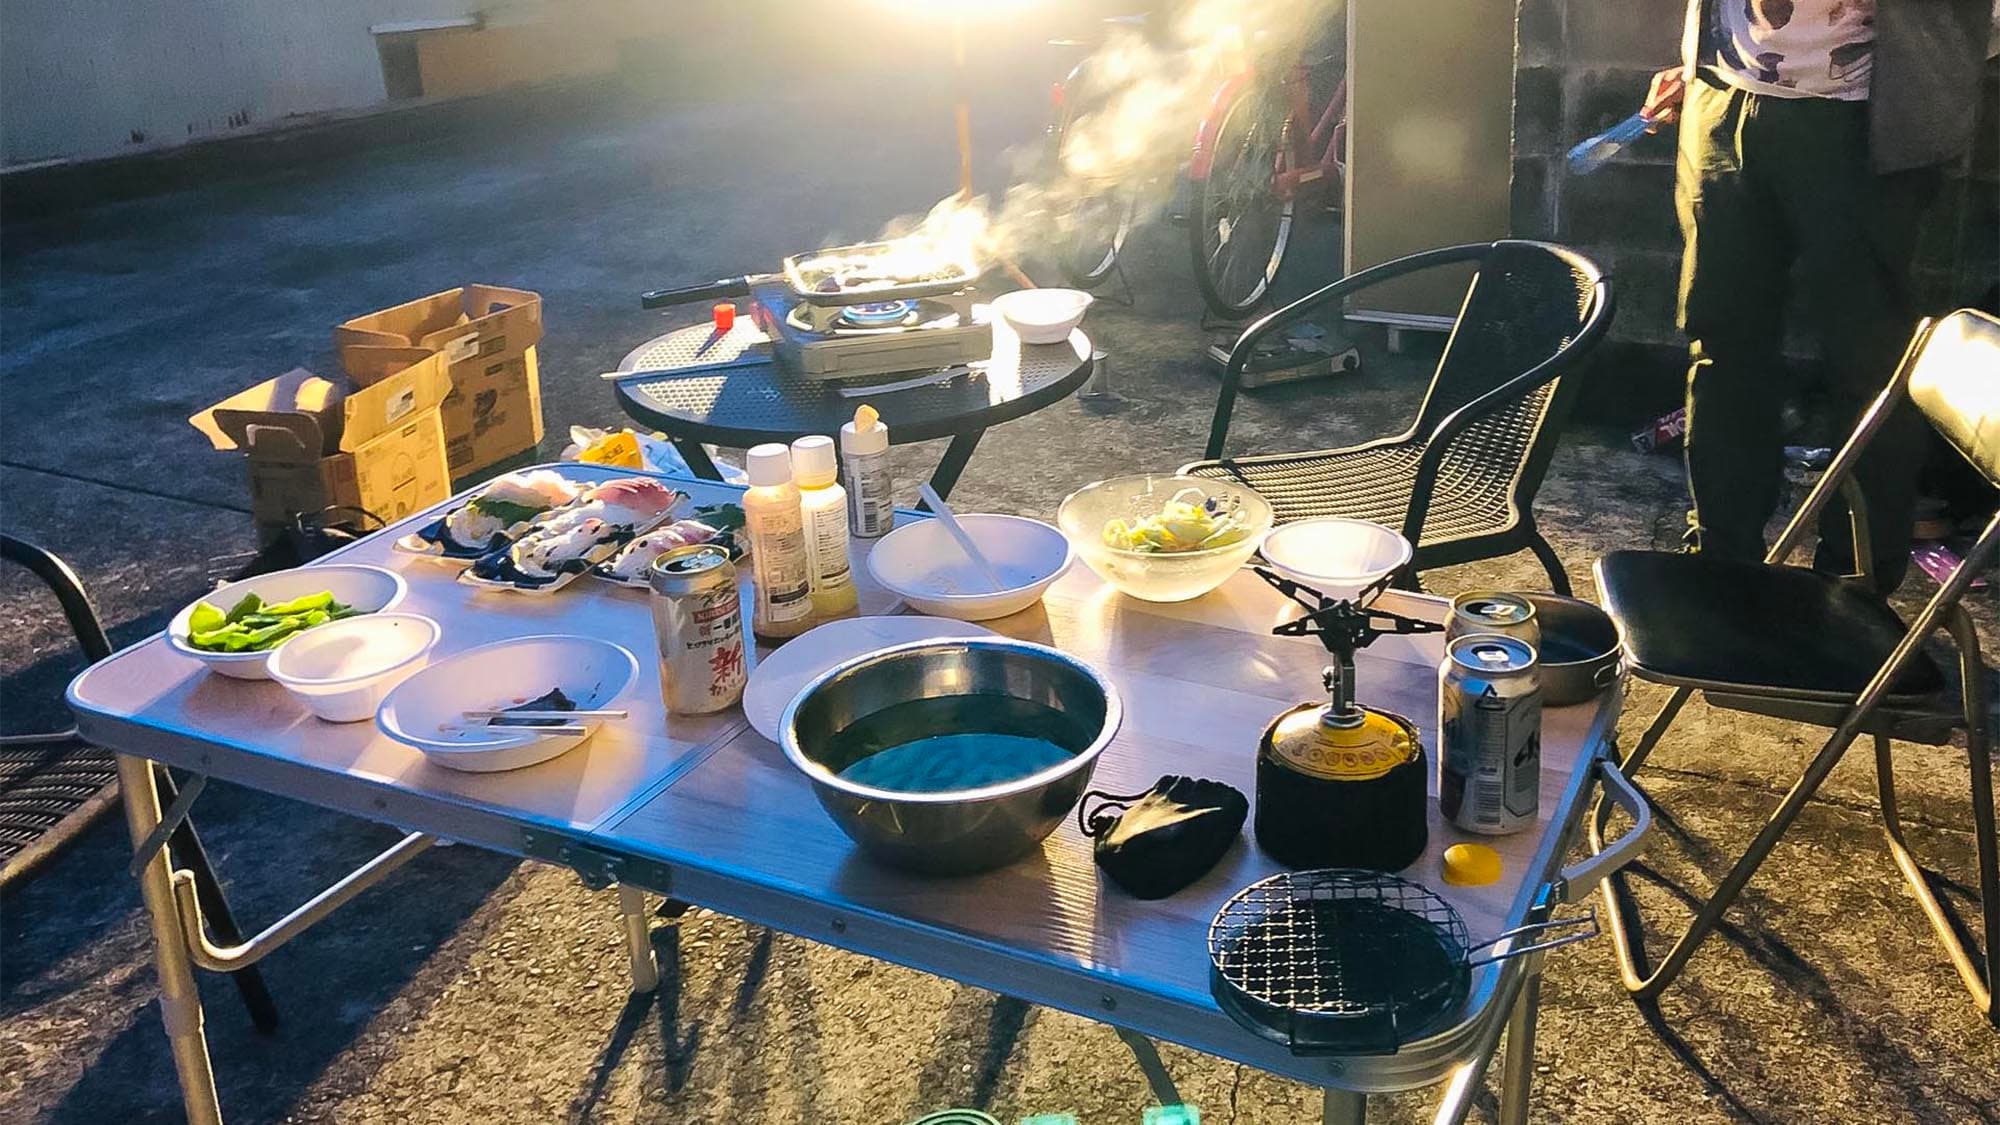 ・ You can also enjoy BBQ outside